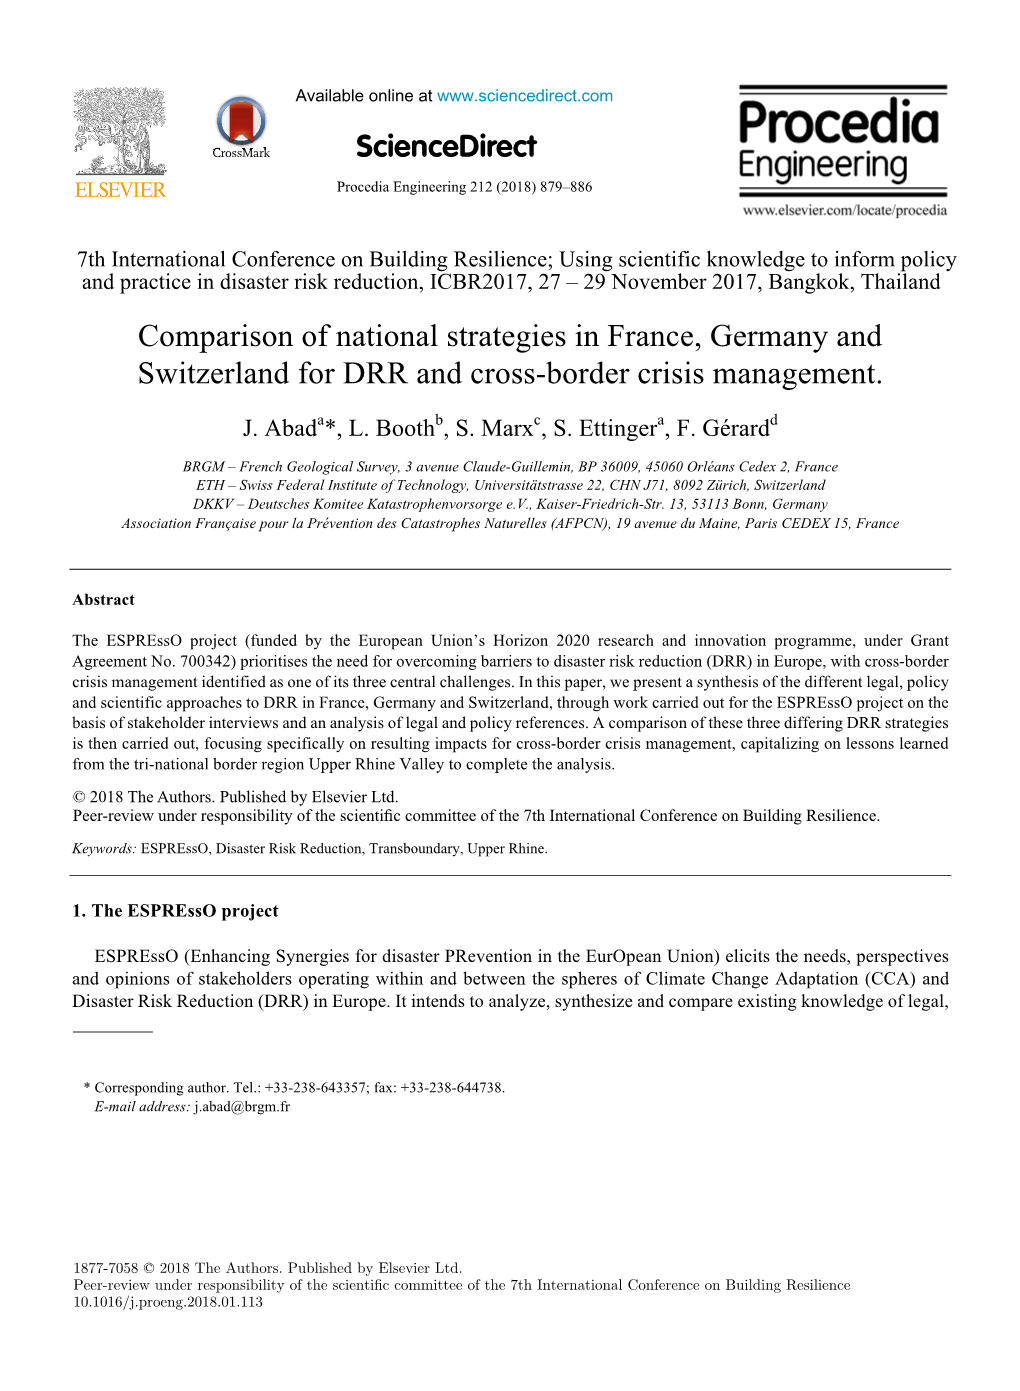 Comparison of National Strategies in France, Germany and Switzerland for DRR and Cross-Border Crisis Management